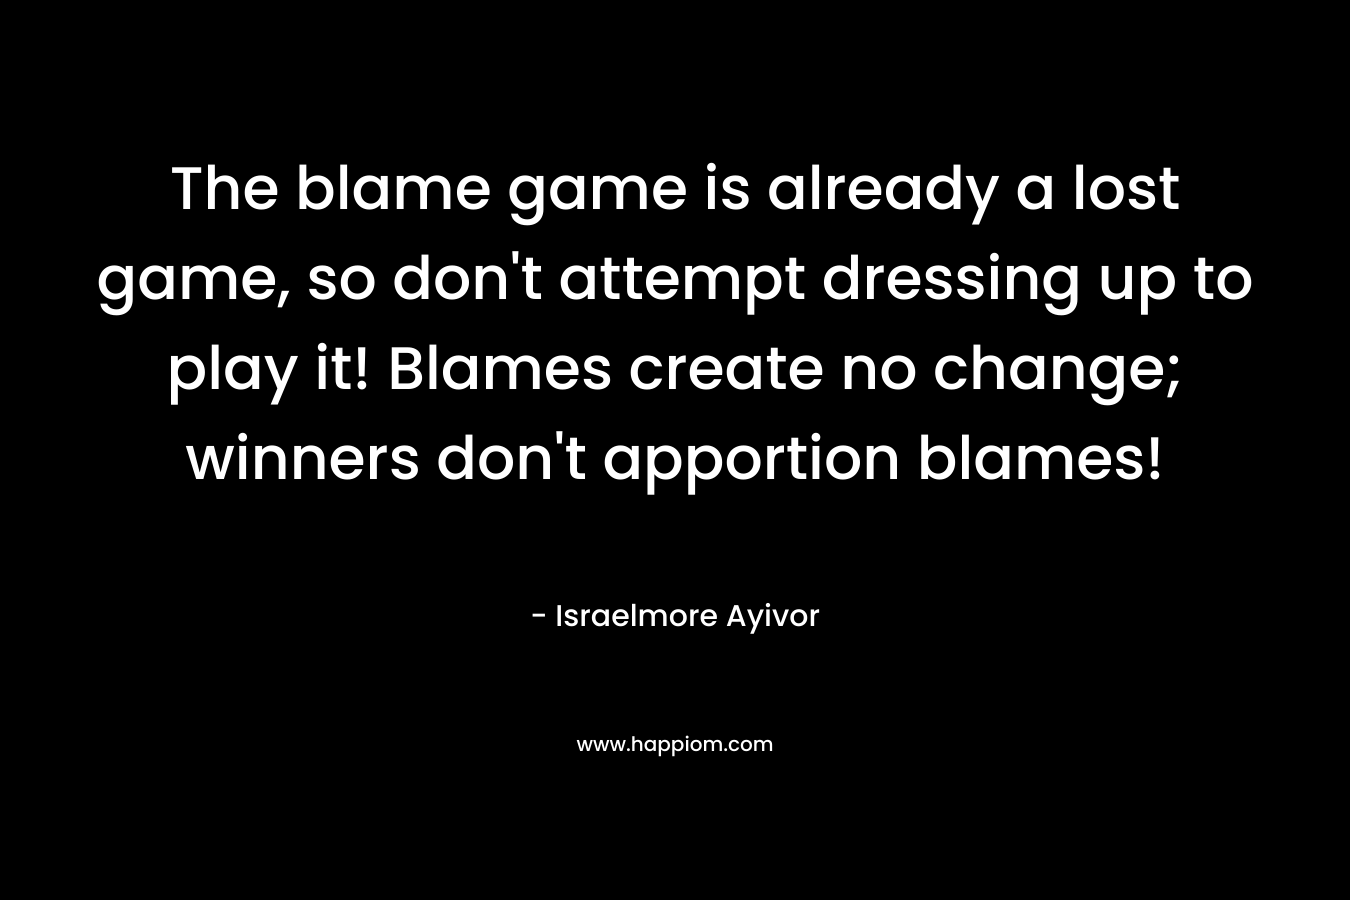 The blame game is already a lost game, so don’t attempt dressing up to play it! Blames create no change; winners don’t apportion blames! – Israelmore Ayivor